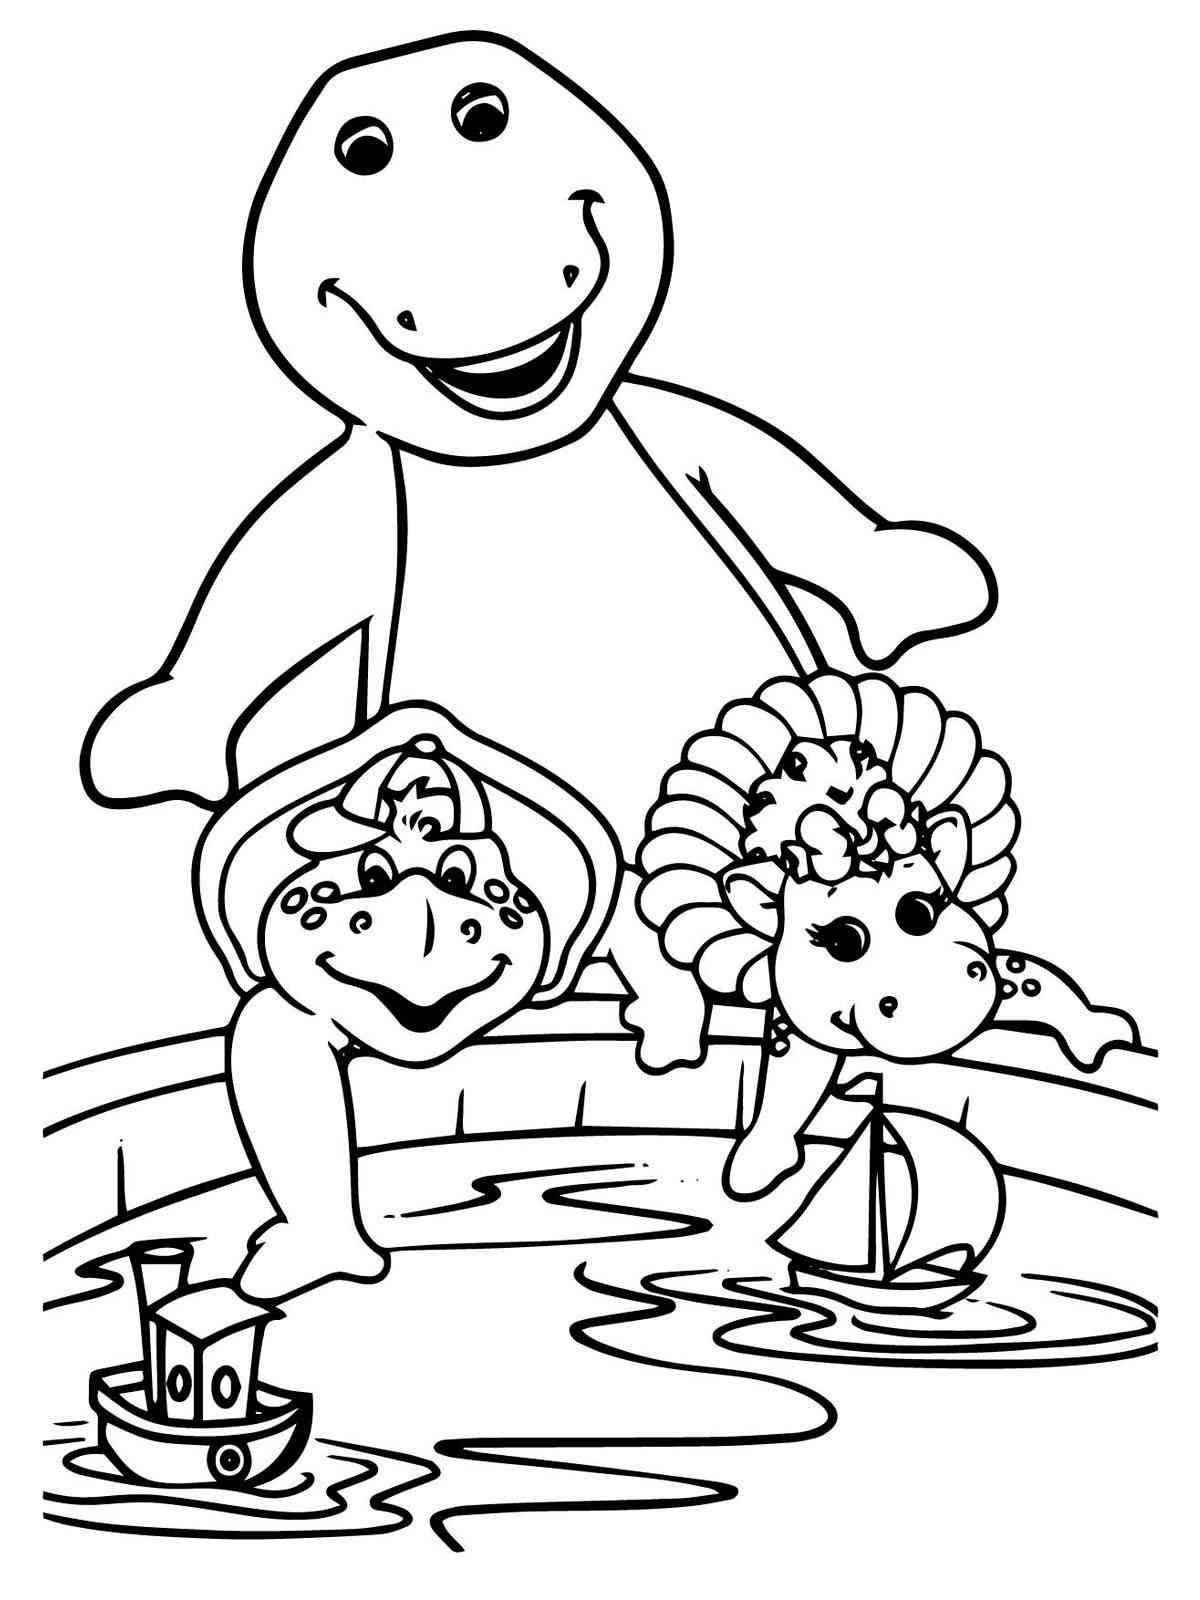 Barney bear coloring page